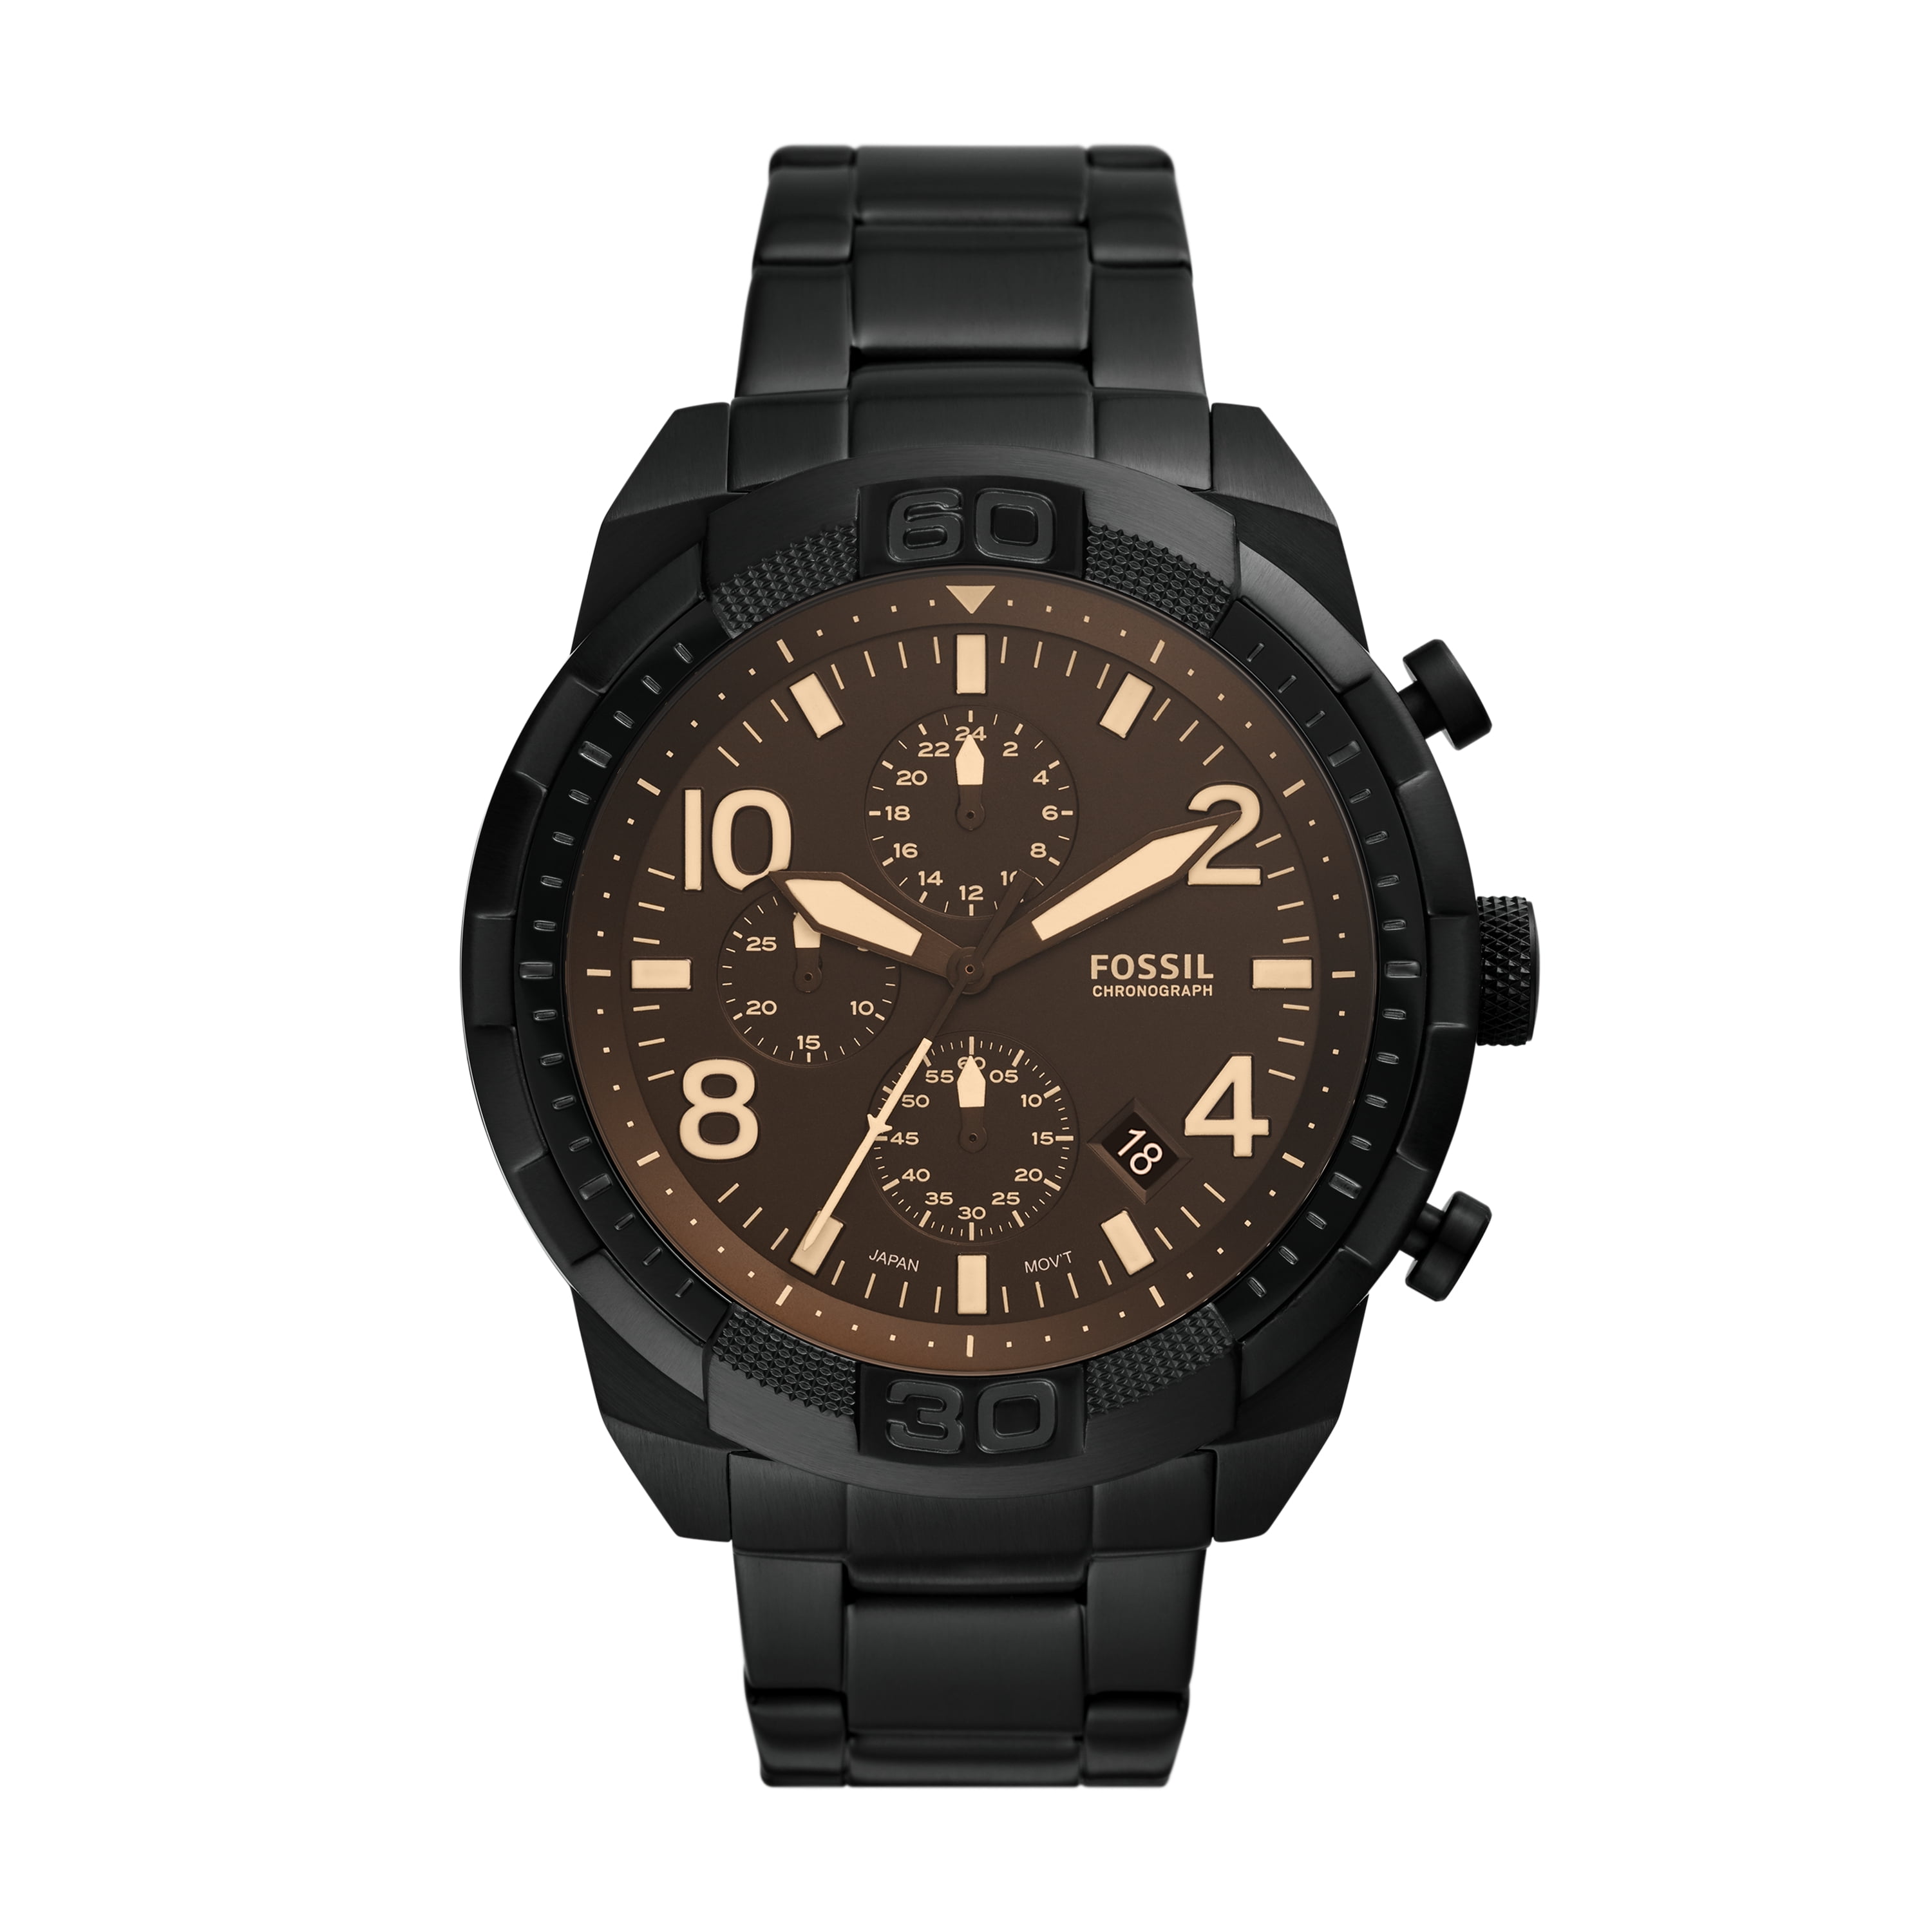 Fossil Men's Bronson Chronograph Black Stainless Steel Watch 